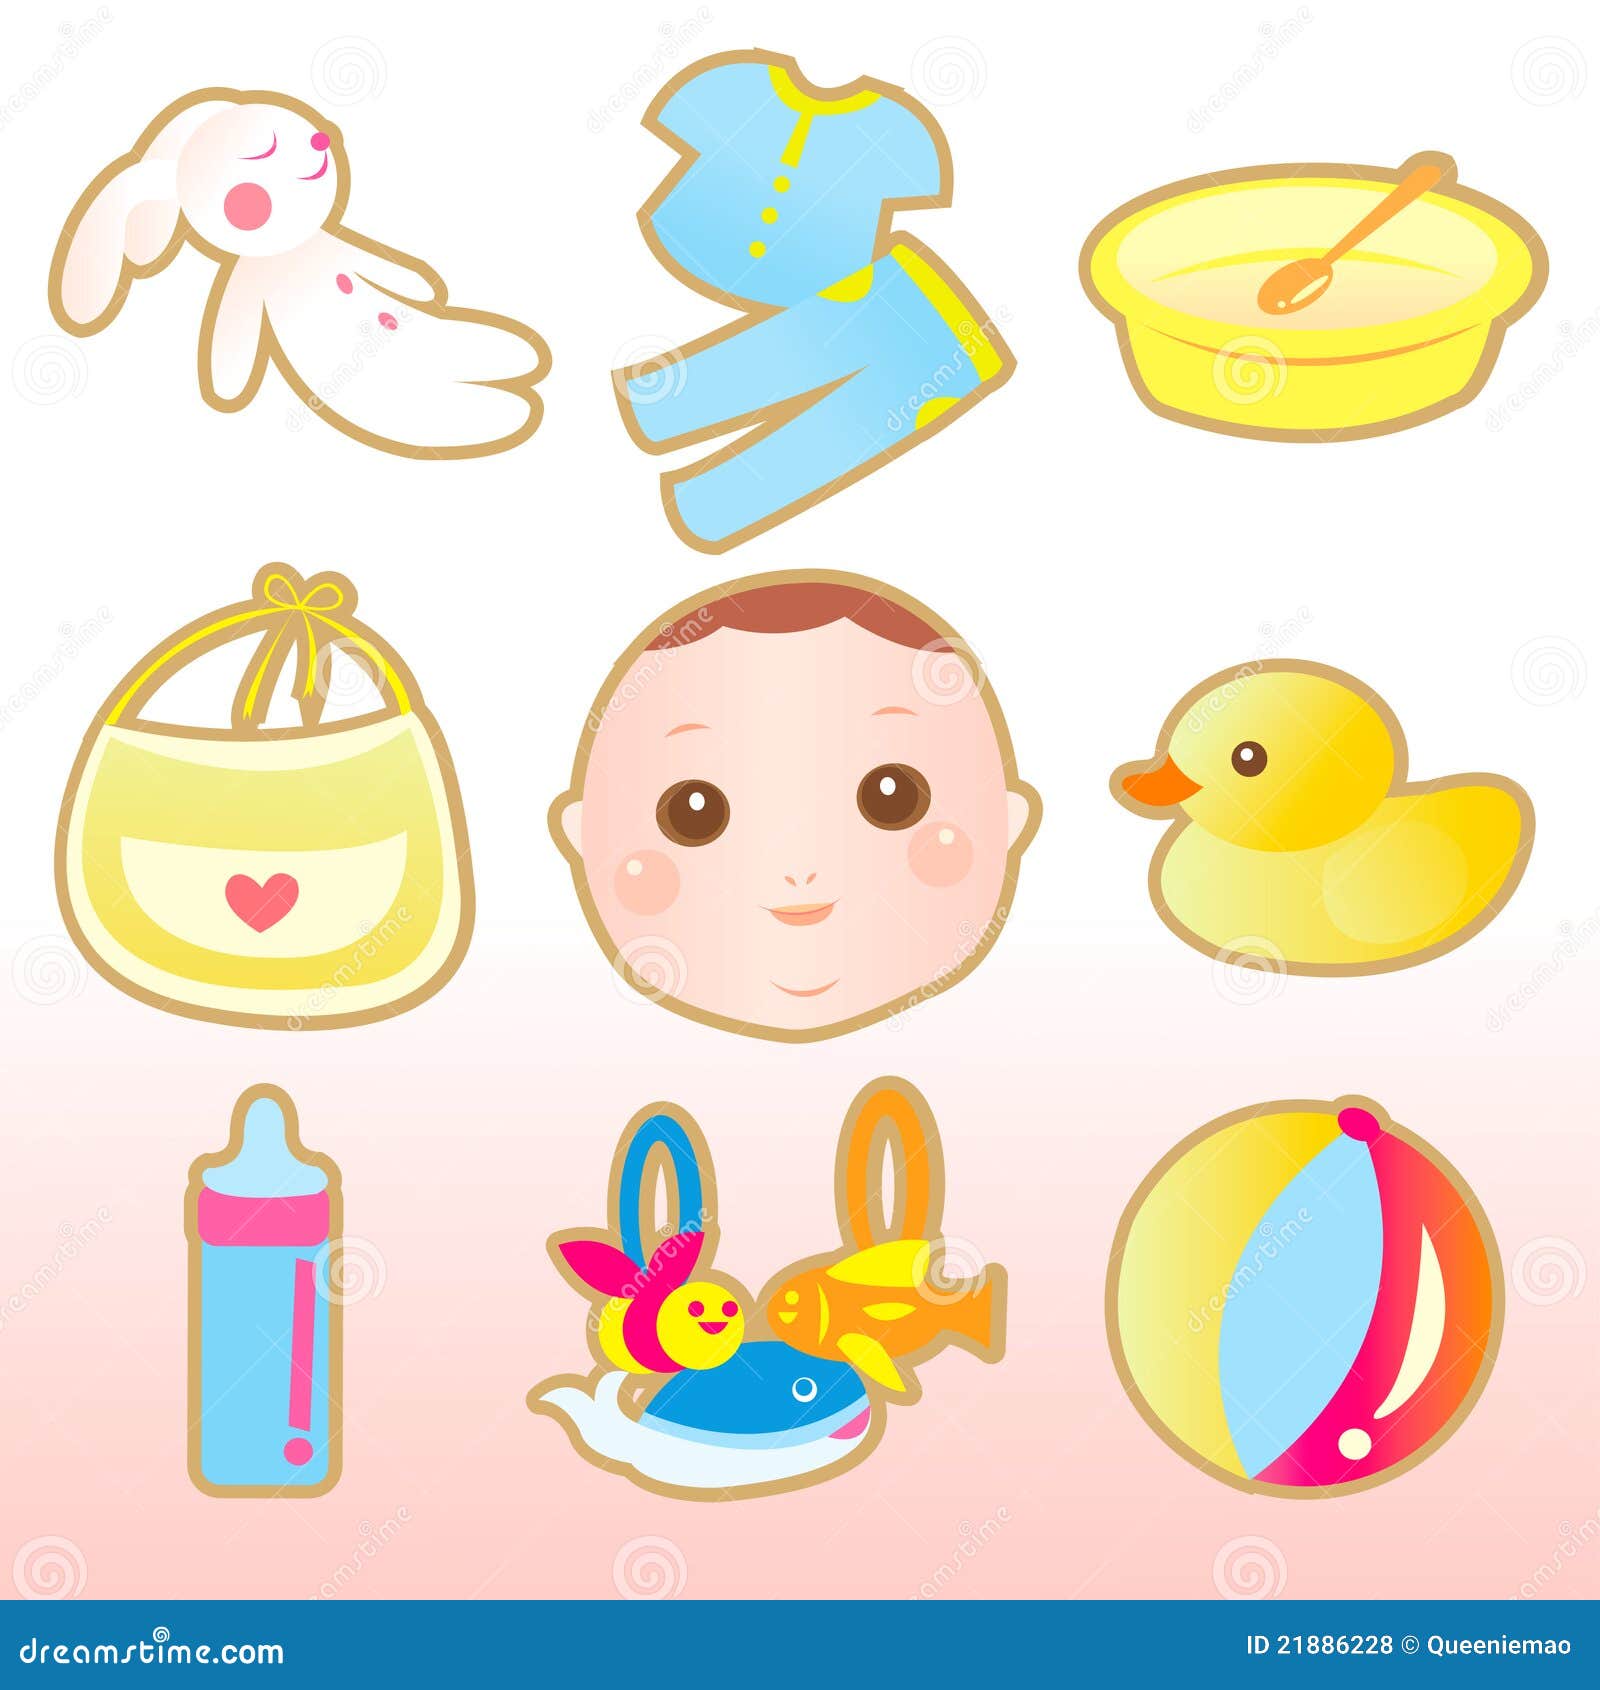 New Born Baby Elements Stock Vector (Royalty Free) 106425572